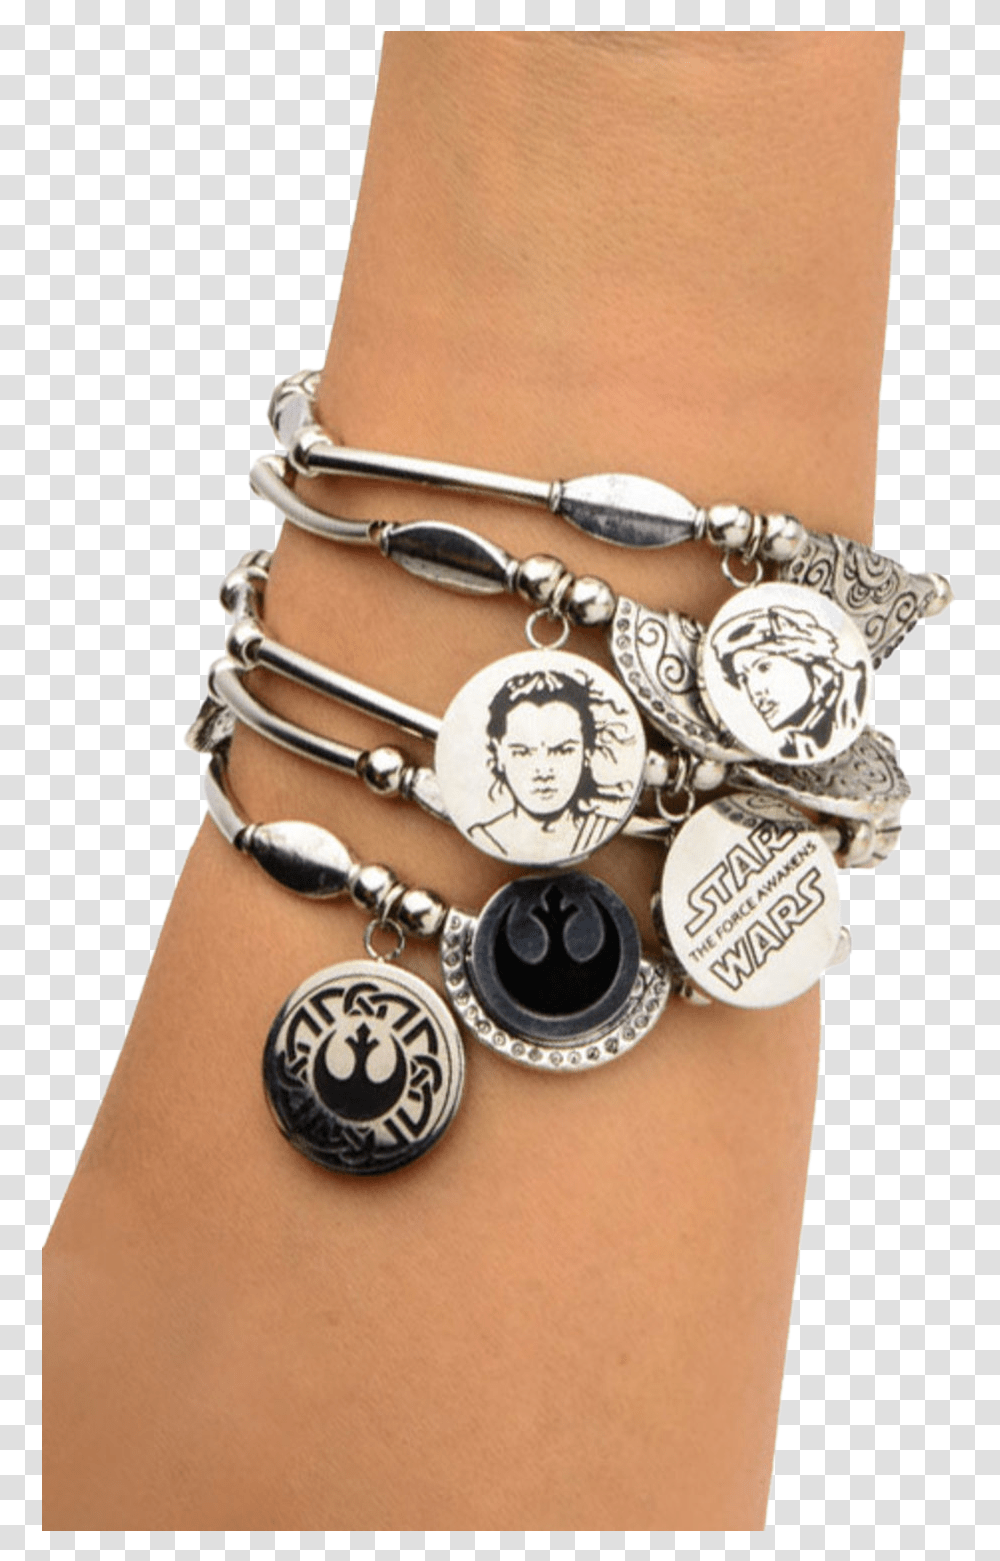 Star Wars Jewellery Episode 7 Rey Stainless Steel Charm Bracelet, Accessories, Accessory, Jewelry, Necklace Transparent Png